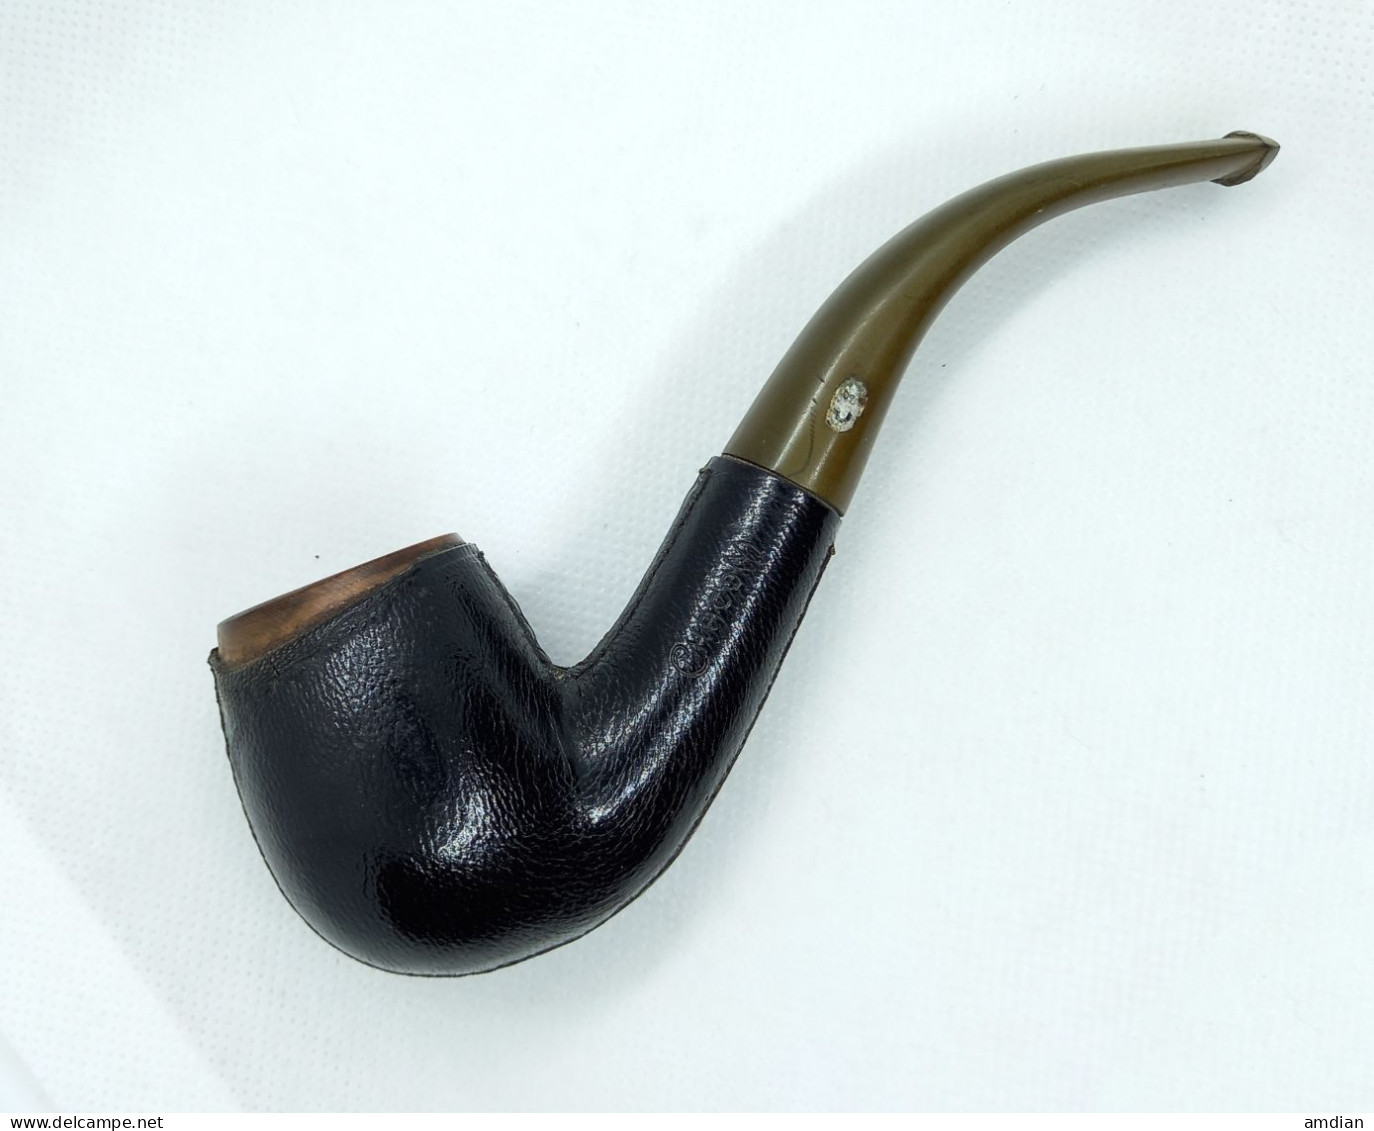 CHACOM 42 Bent Billiard Leather Pipe, Used Vintage Smoking Tobacco Pipe Made In France - Pipas En Madera De Brezo ( Bruyere)